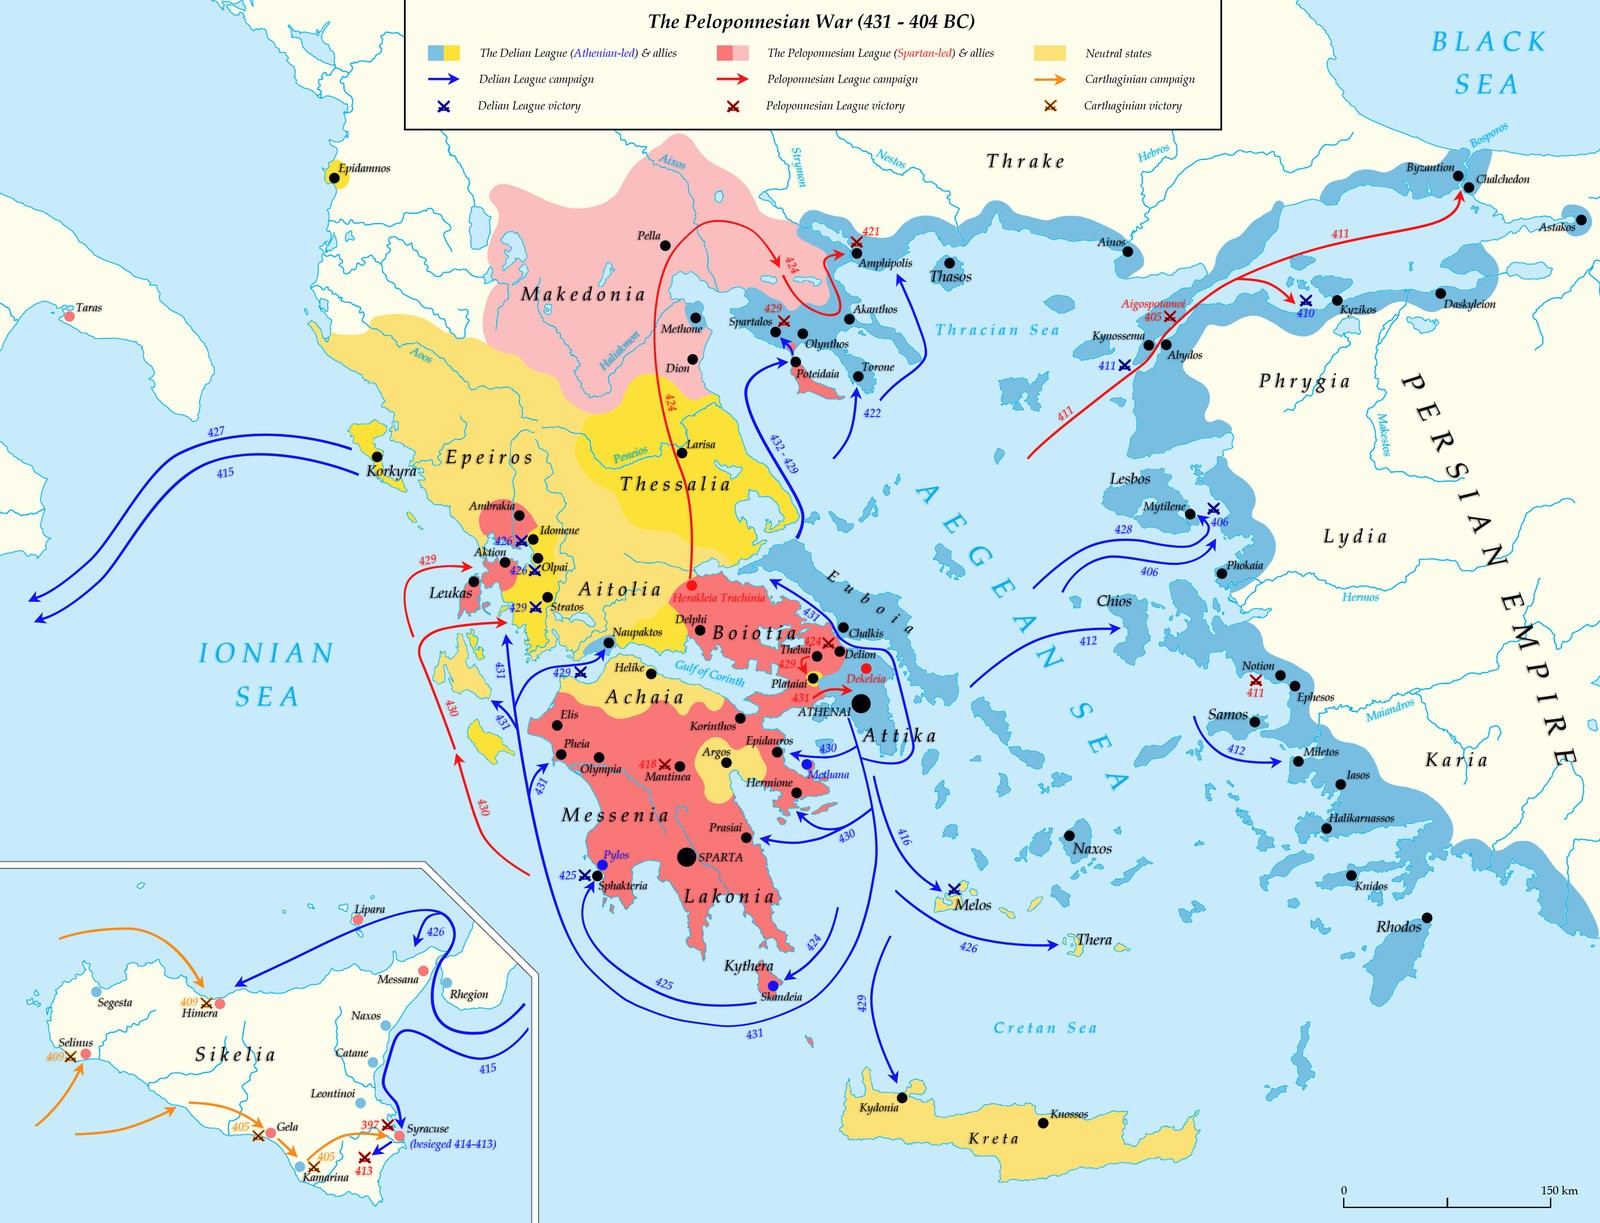 The peloponnesian war involved what two cities?